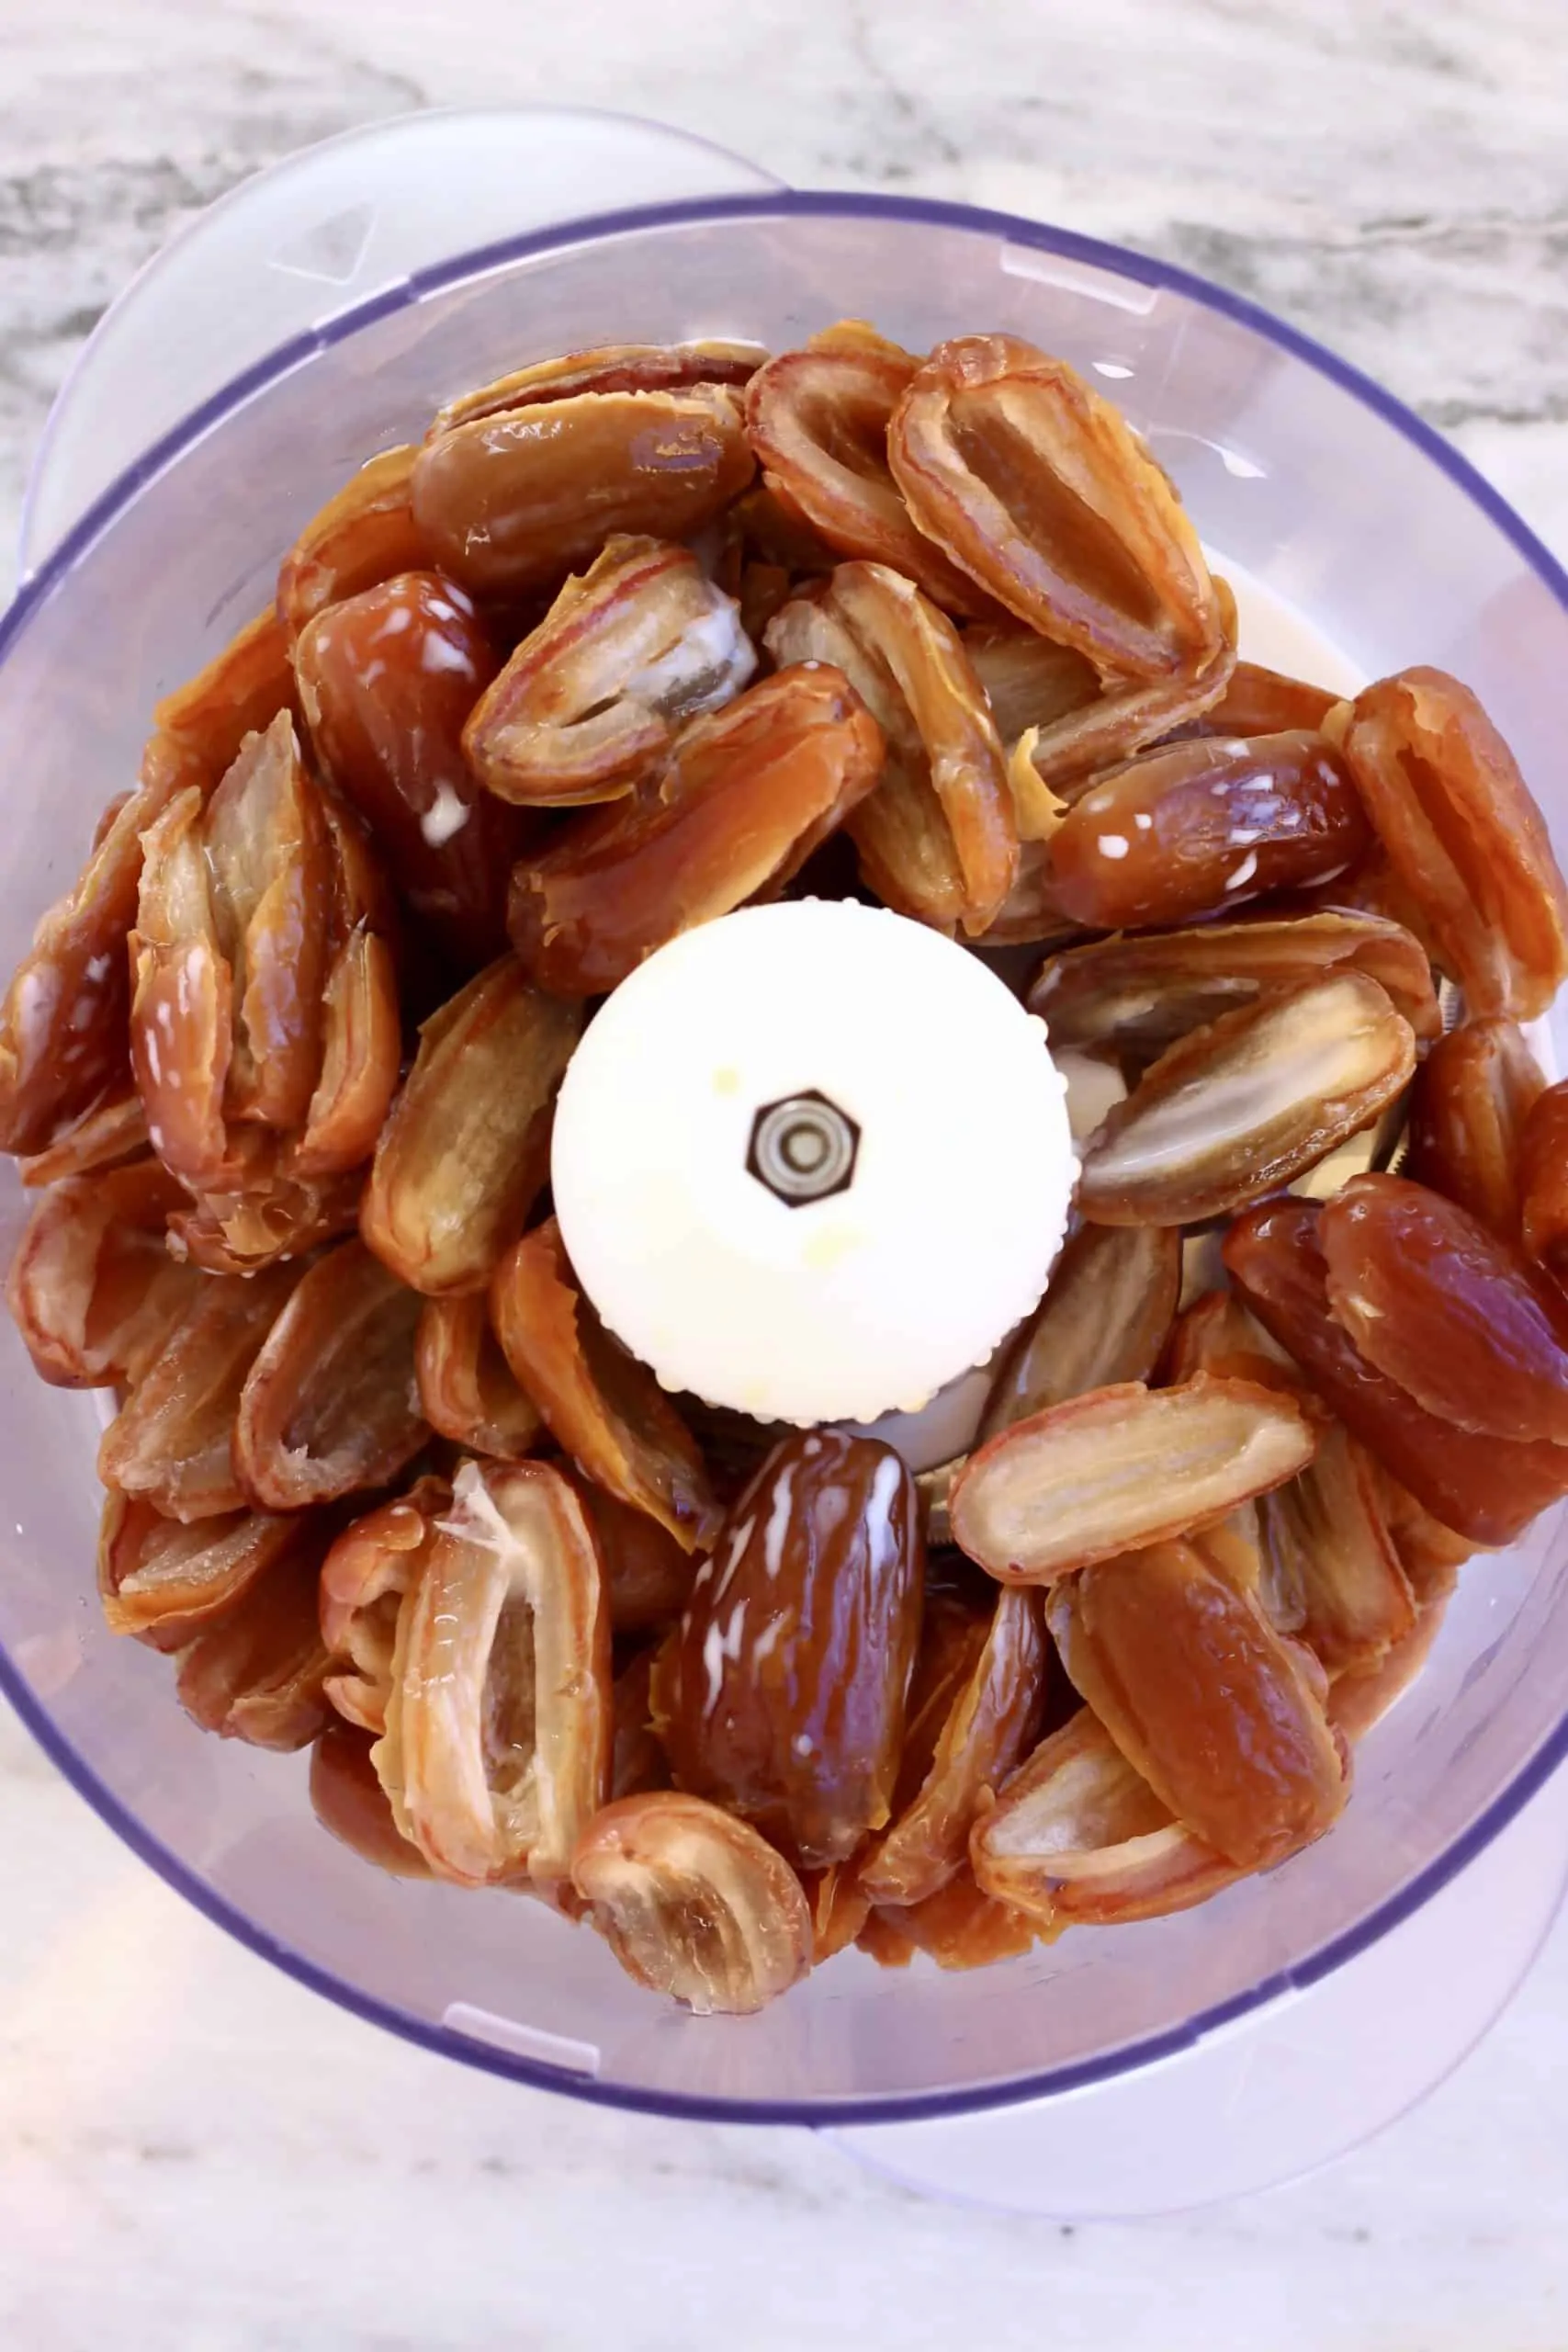 Dates and almond milk in a food processor